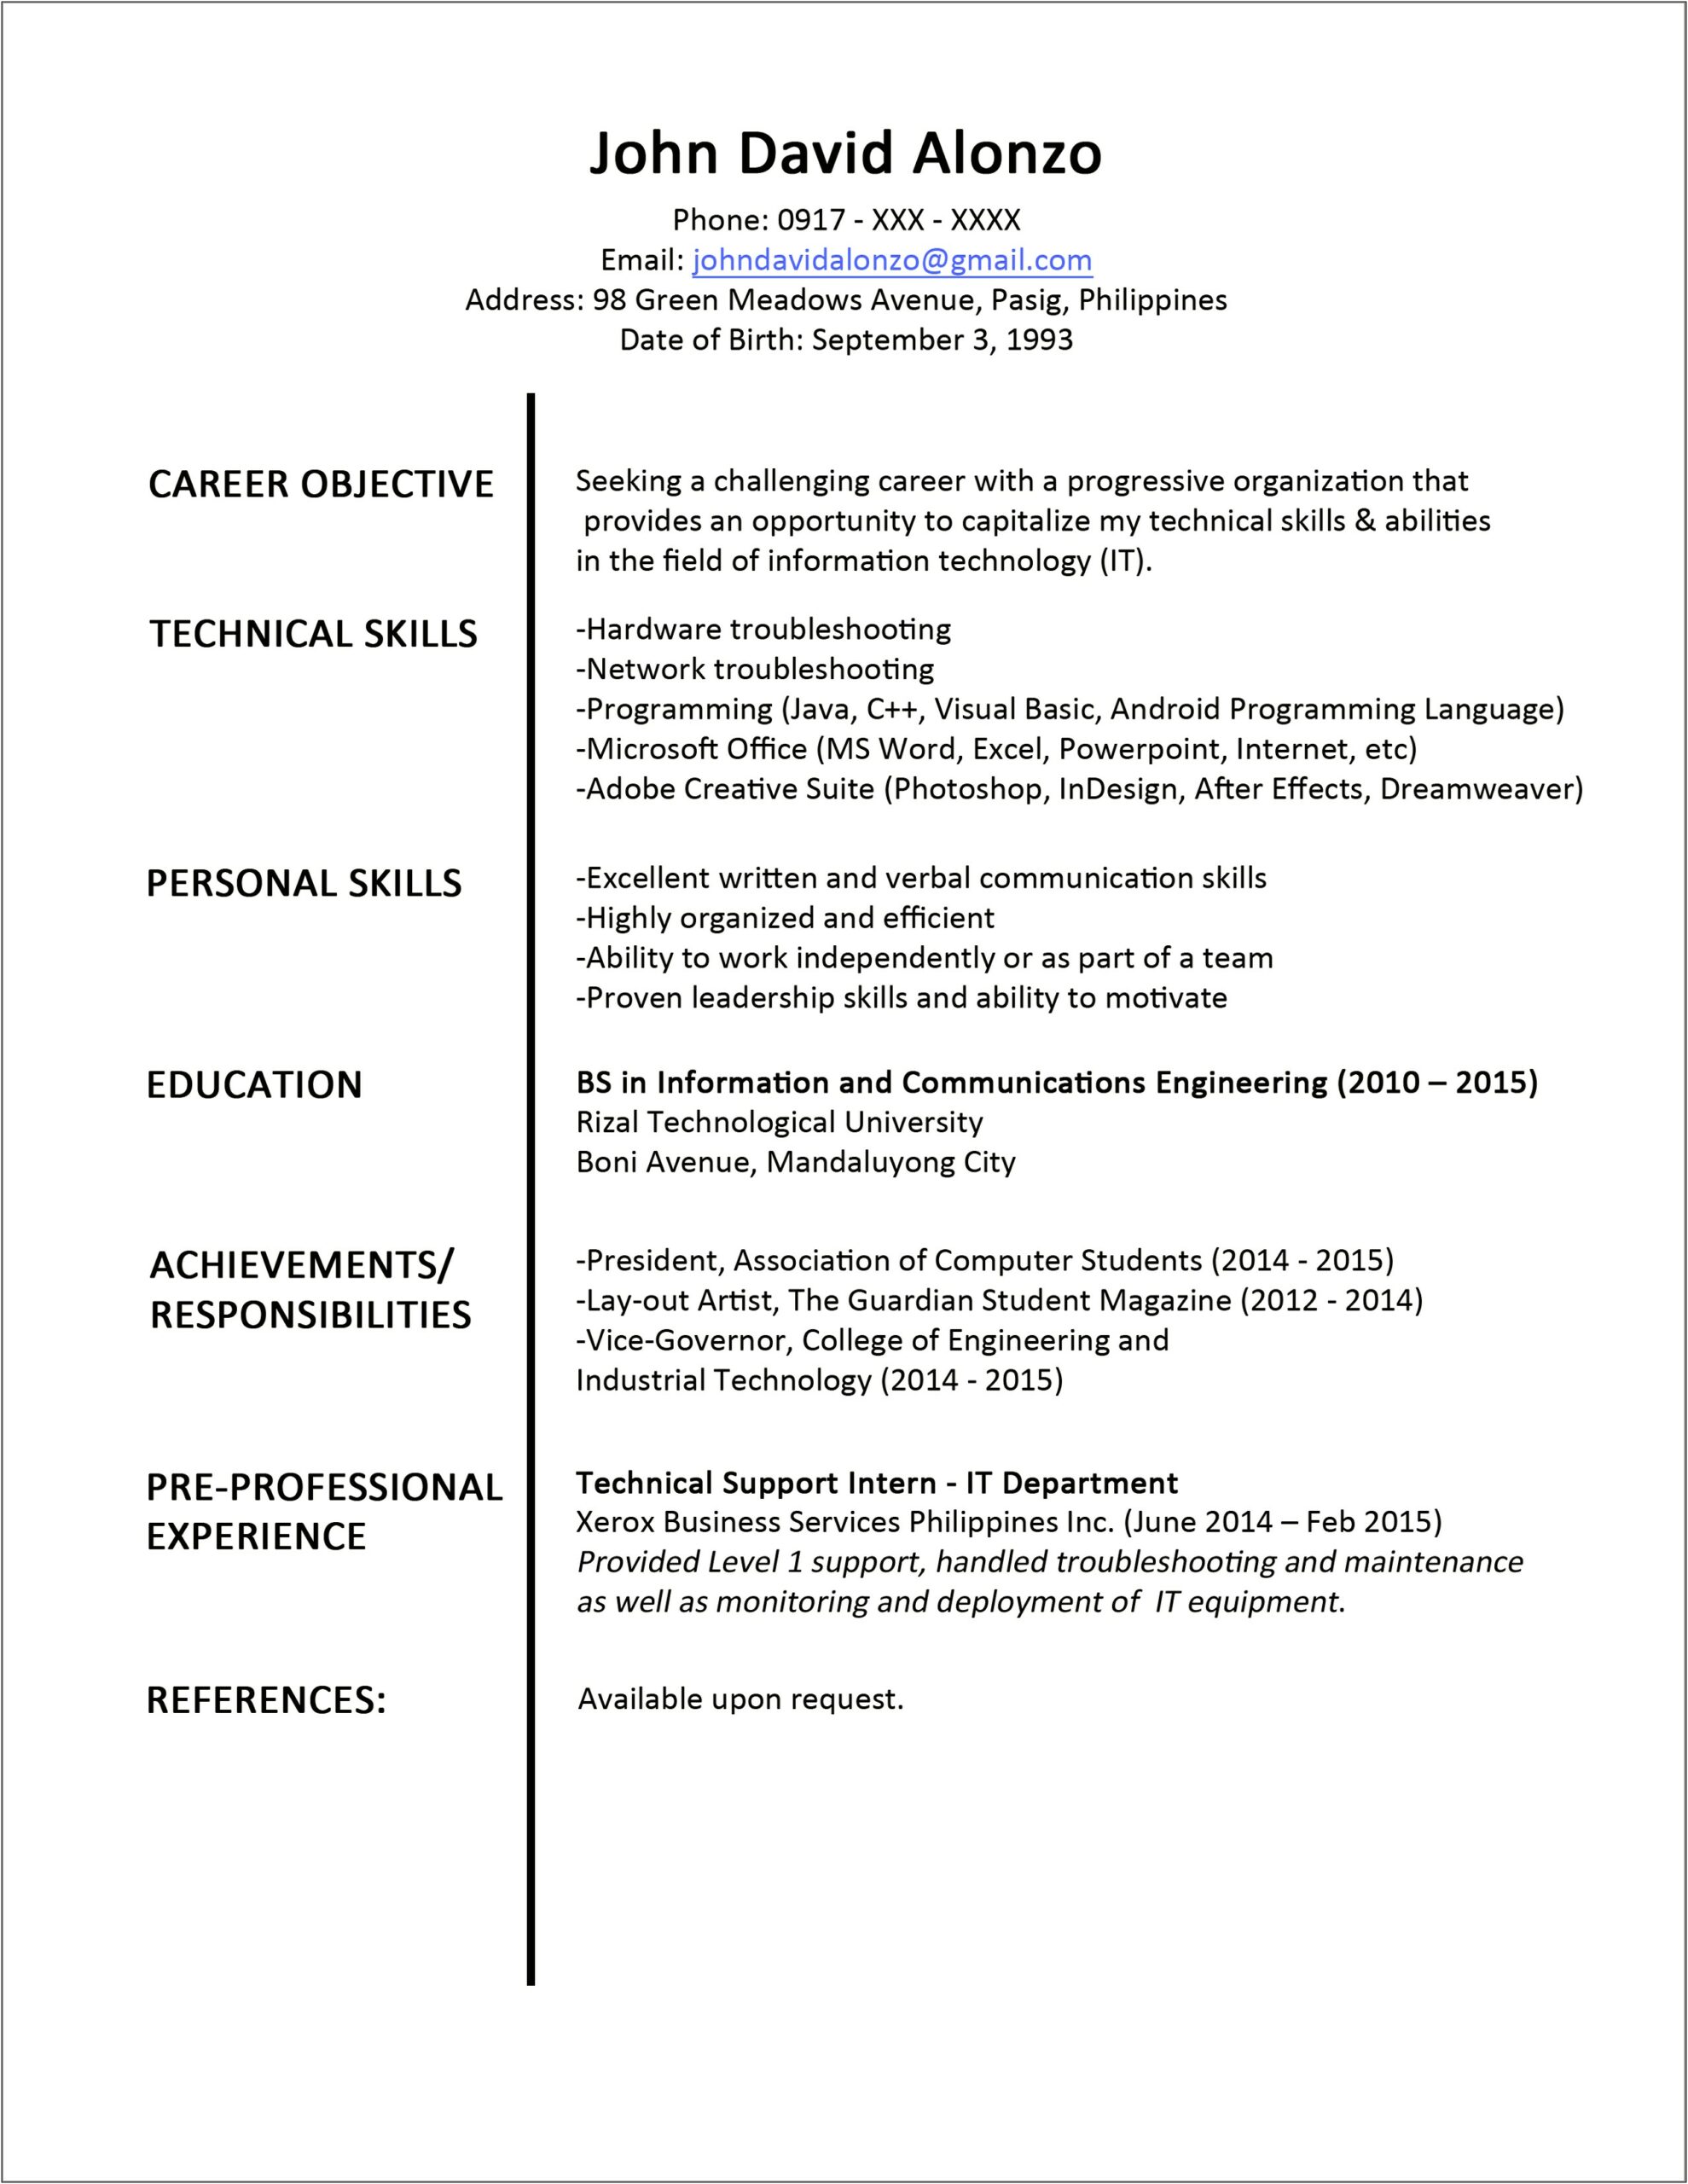 Resume Sample With Additional Resposibiliteis